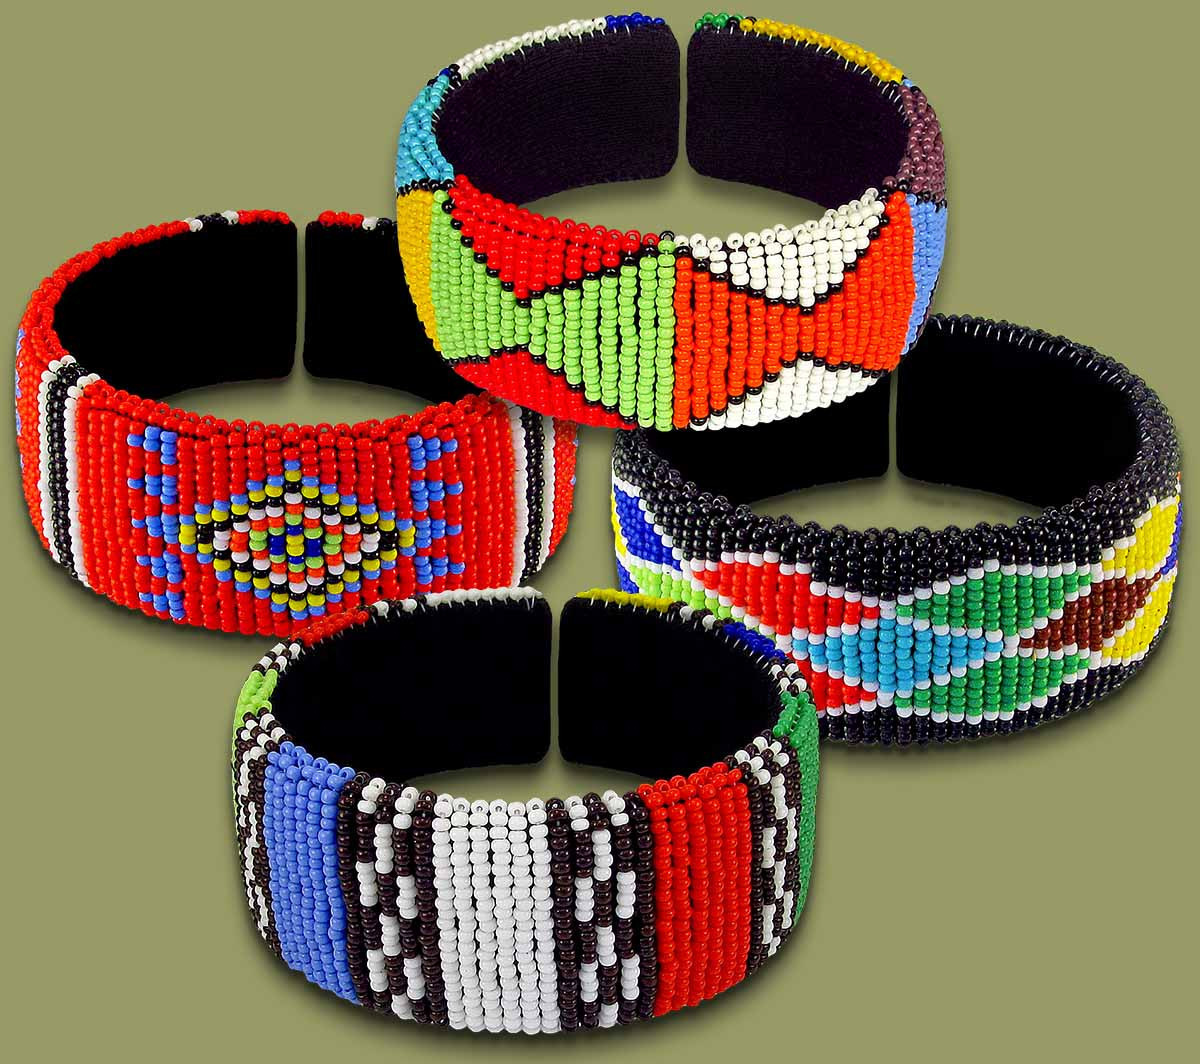 South African Arts and Crafts - SOUTH AFRICAN SOUVENIRS ONLINE